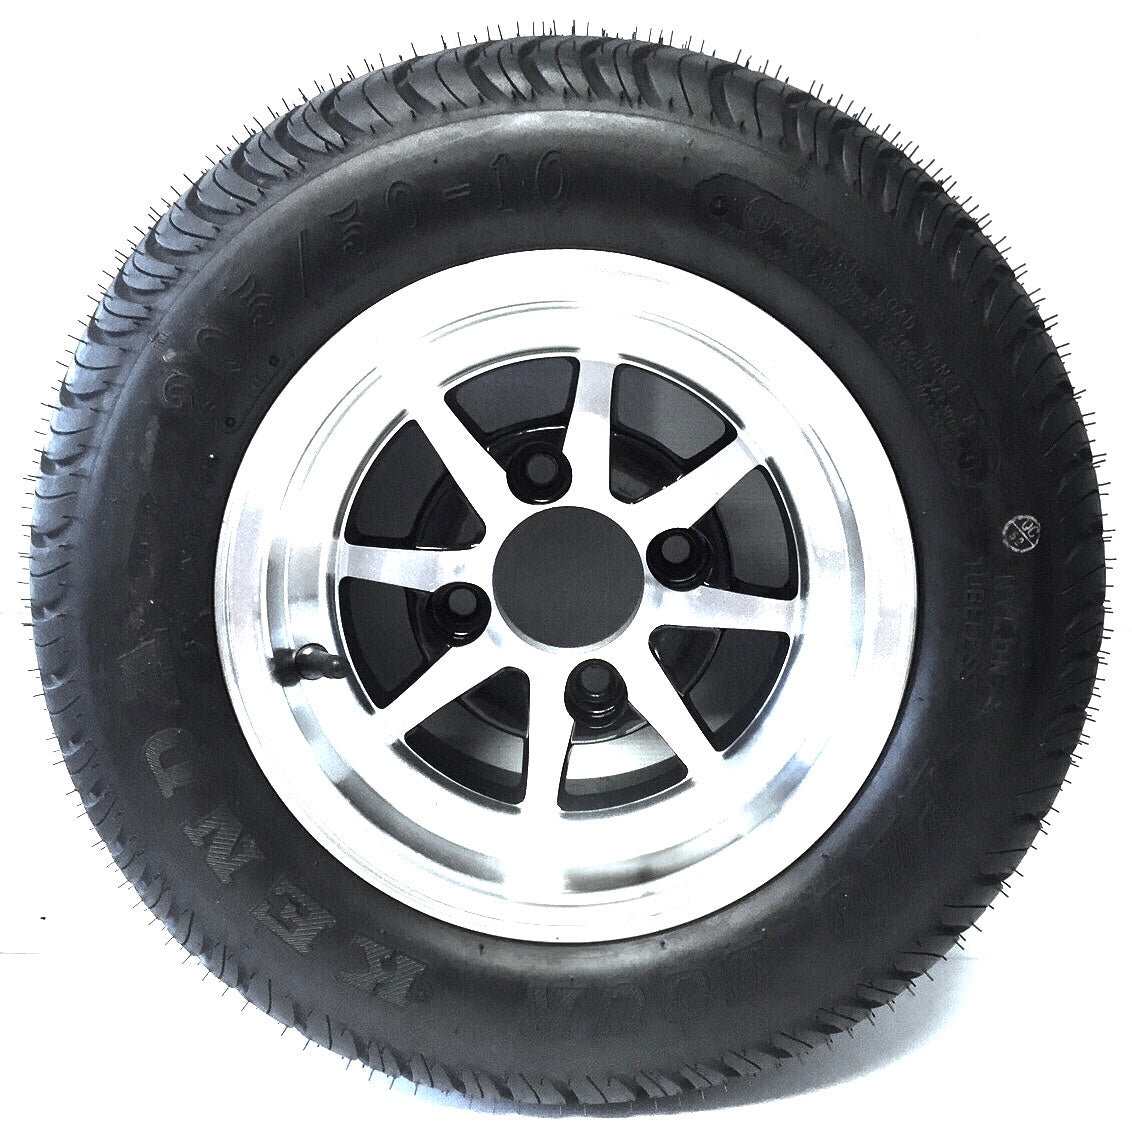 EMC WHEEL AND TYRE, 10 INCH ALLOY WITH 205/50/10 TYRE